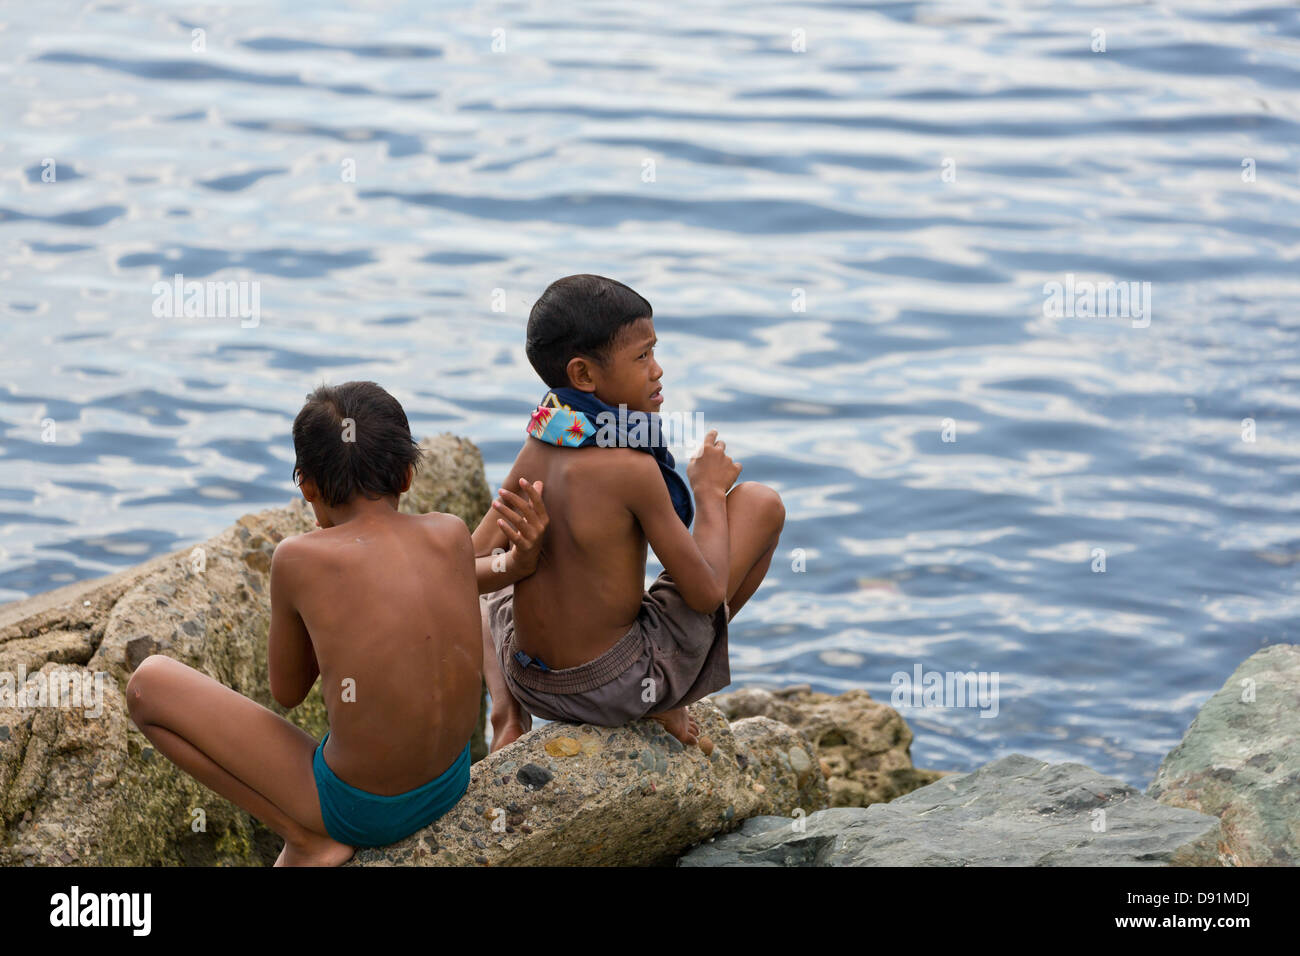 Bathing Local Boys High Resolution Stock Photography and Images - Alamy